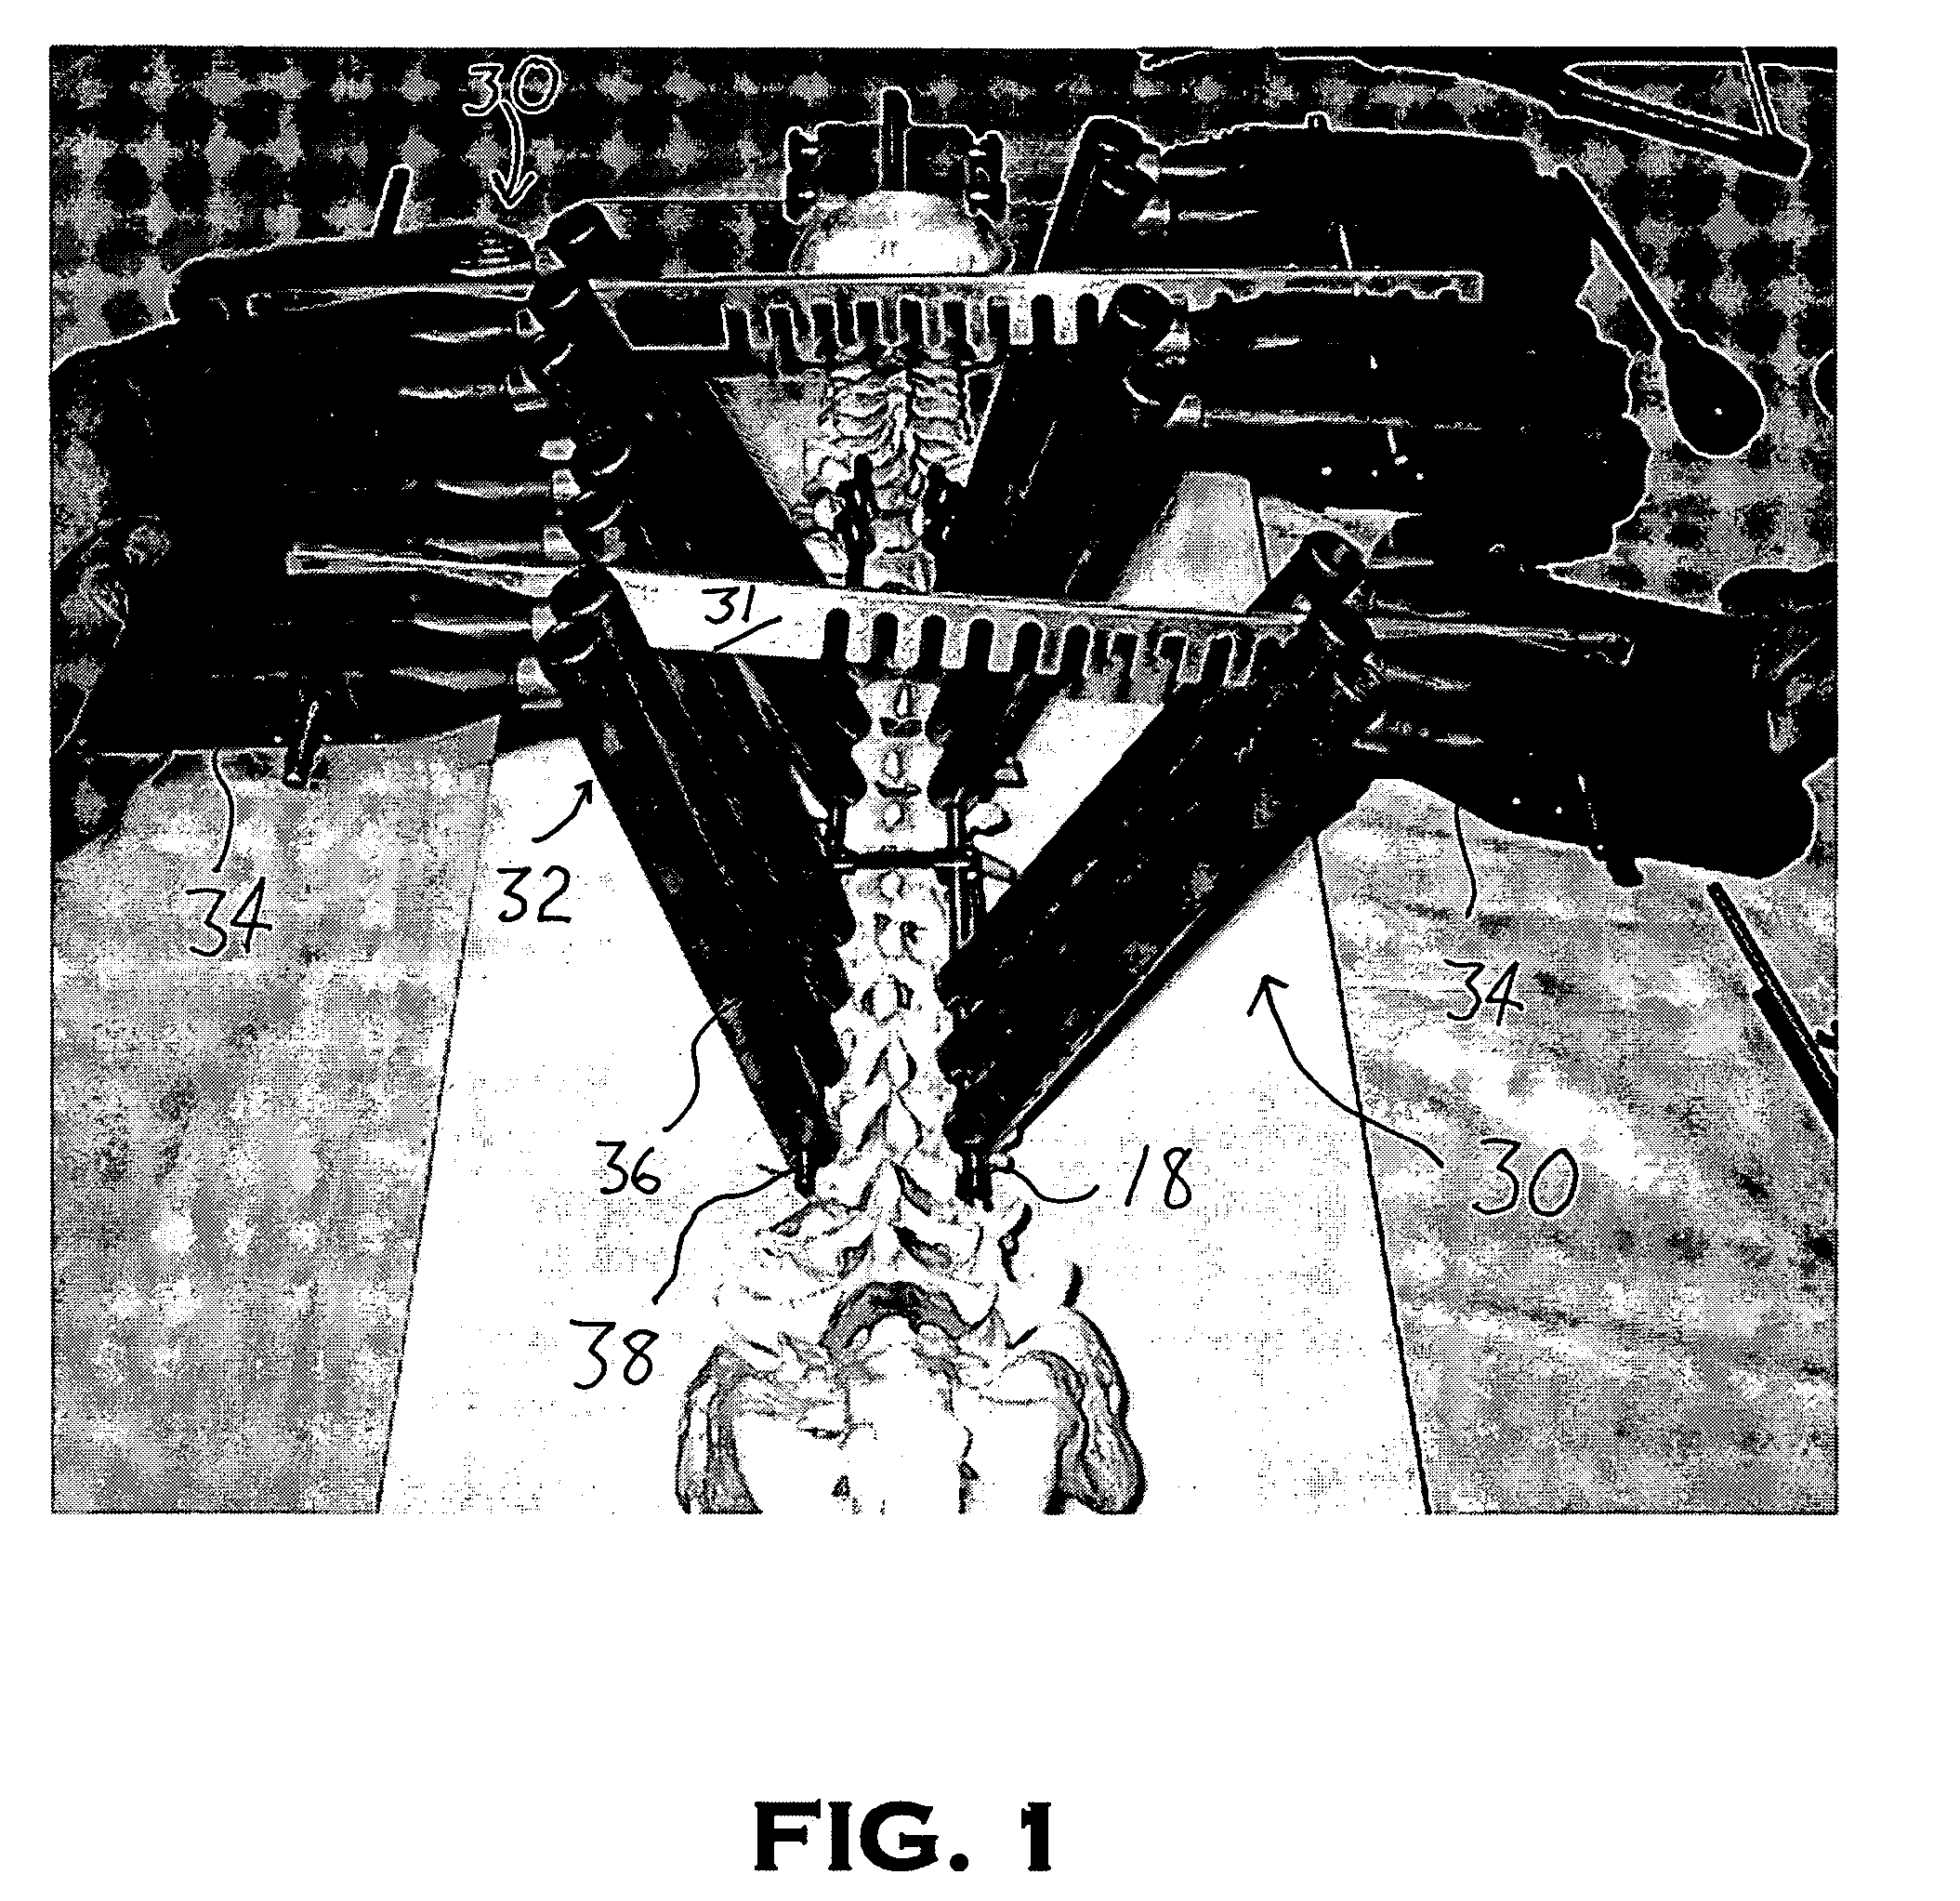 System and method for aligning vertebrae in the amelioration of aberrant spinal column deviation conditions